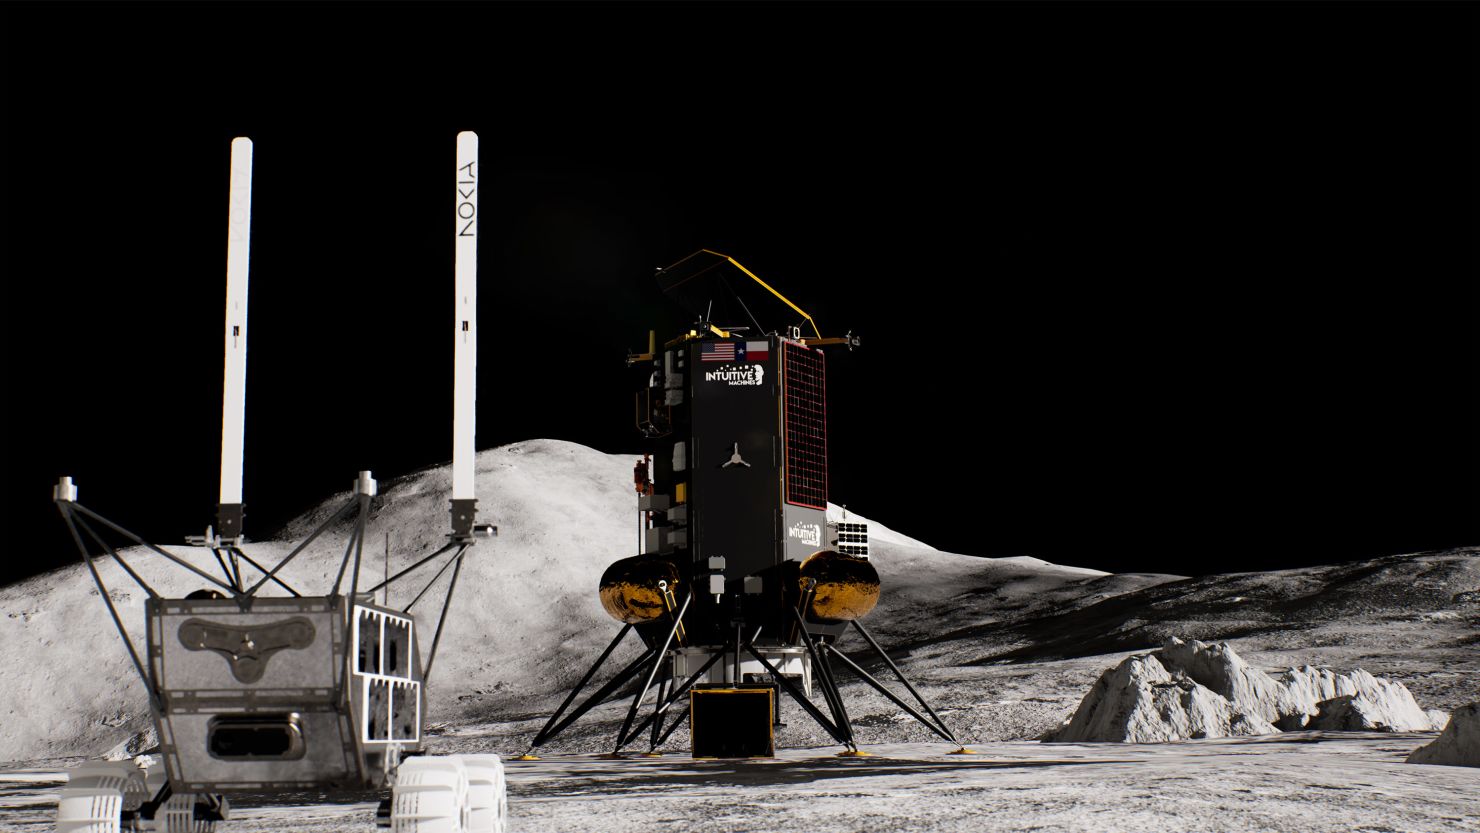 An artist rendering of the Lunar Outpost rover, with Nokia antennas extended, on the Moon, a vision of Nokia and NASA's mission to put a 4G cellular network on the lunar surface.